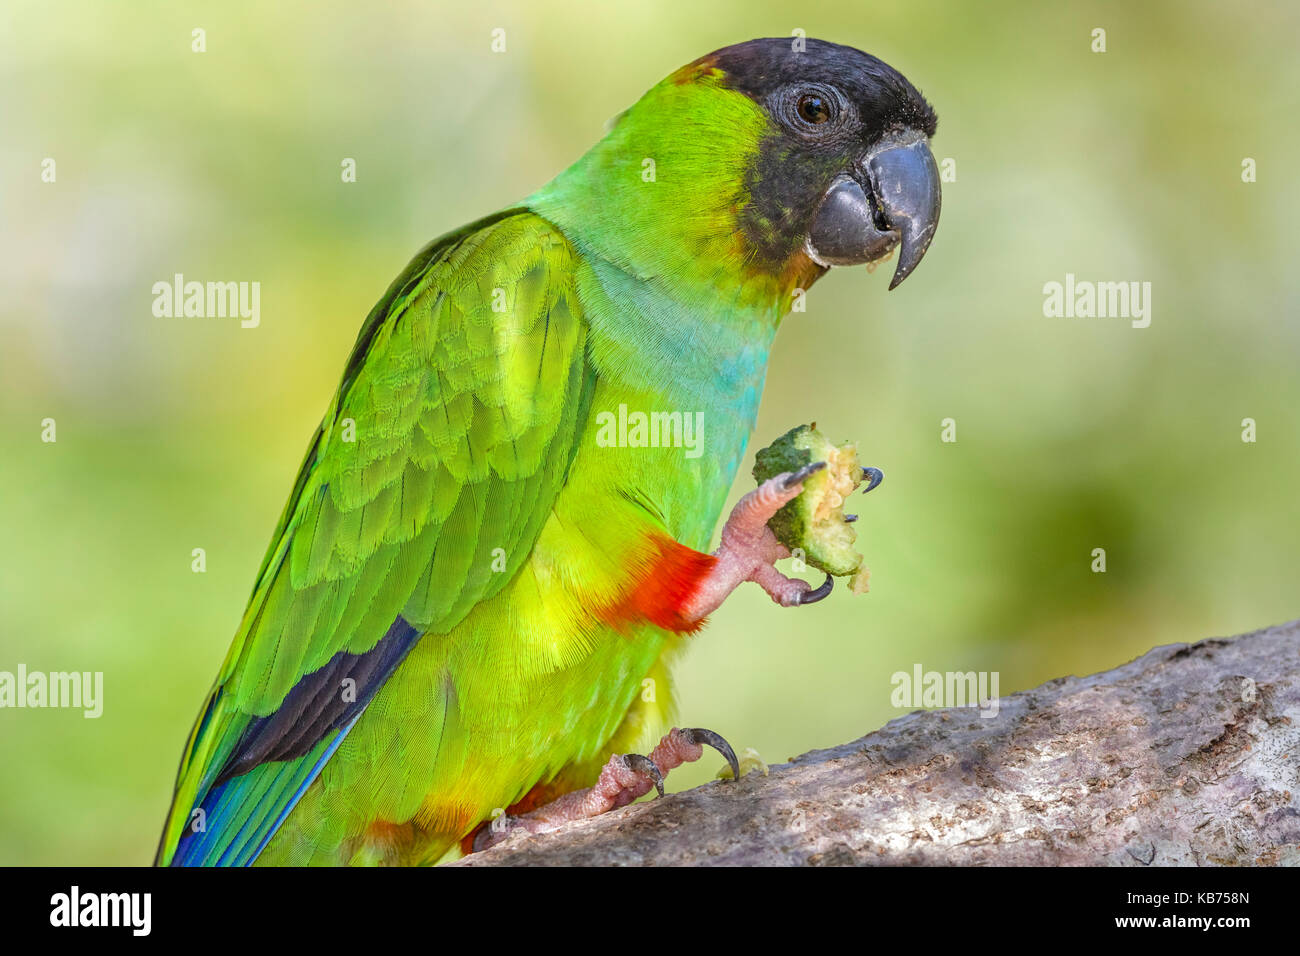 Black-hooded Parakeet (Aratinga nenday) with a fruit in its claw, Brazil, Mato Grosso, Pantanal Stock Photo